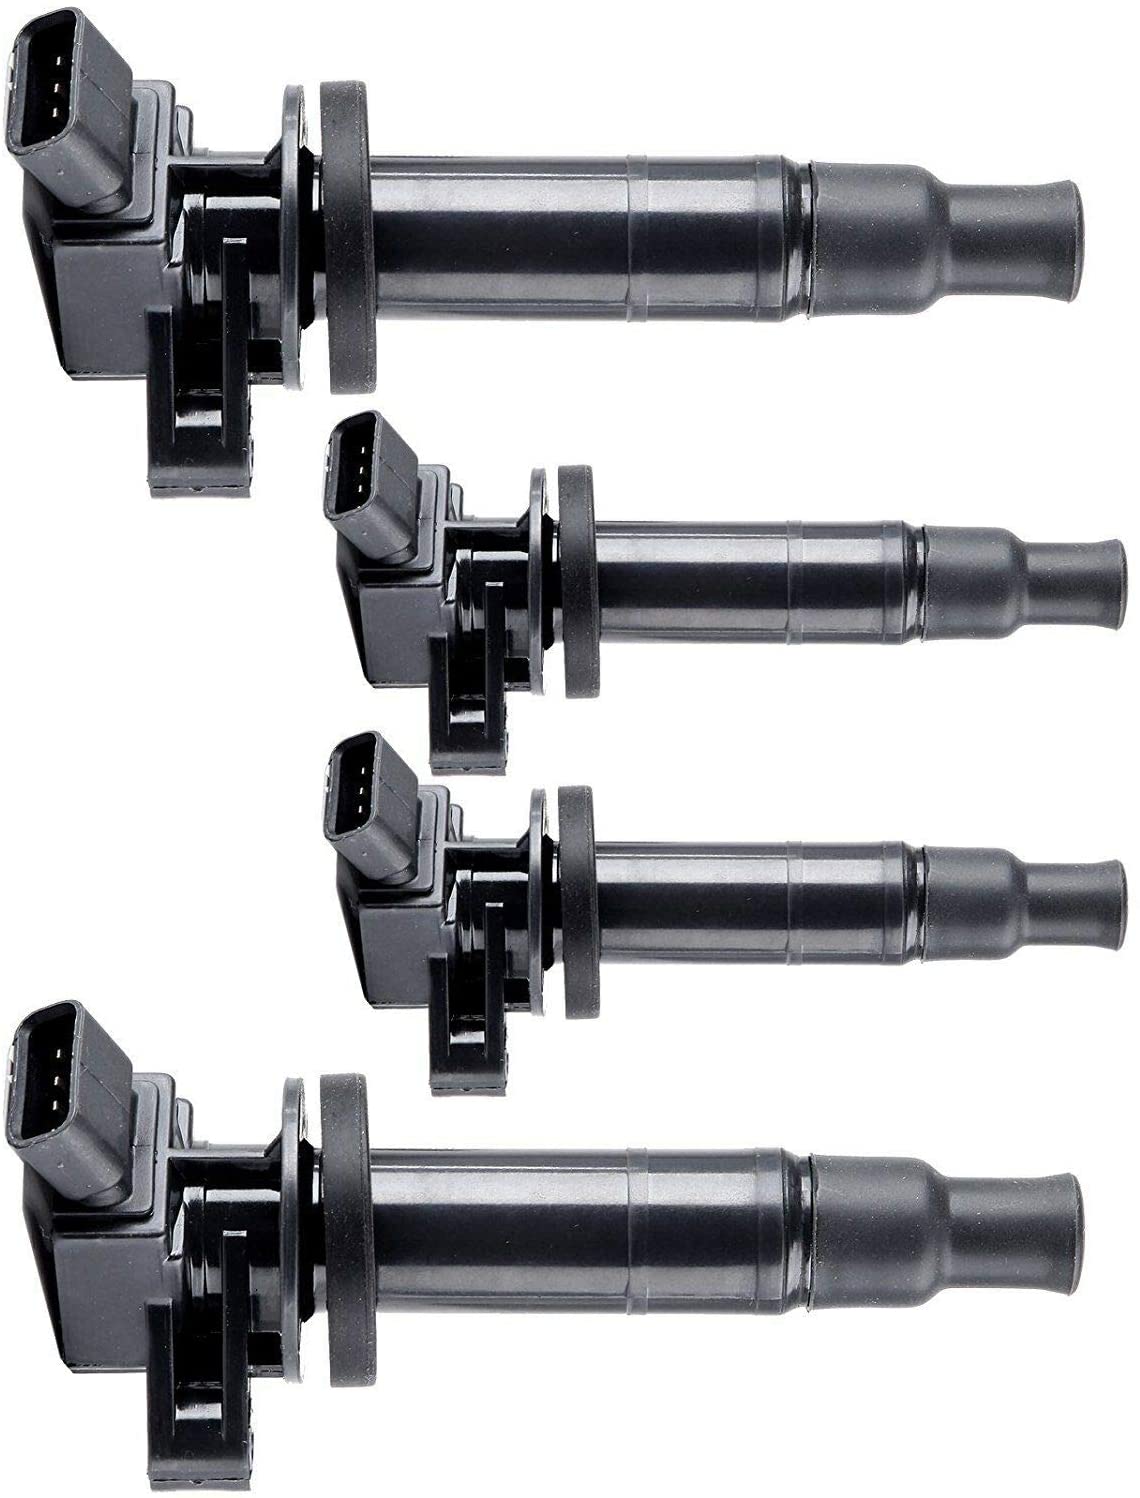 PARTS-DIYER Pack of 4 Ignition Coils fit for 2000-2008 Toyota Corolla Celica Matrix Mr2 Spyder Chevy Prizm Pontiac Vibe 1.8L UF247